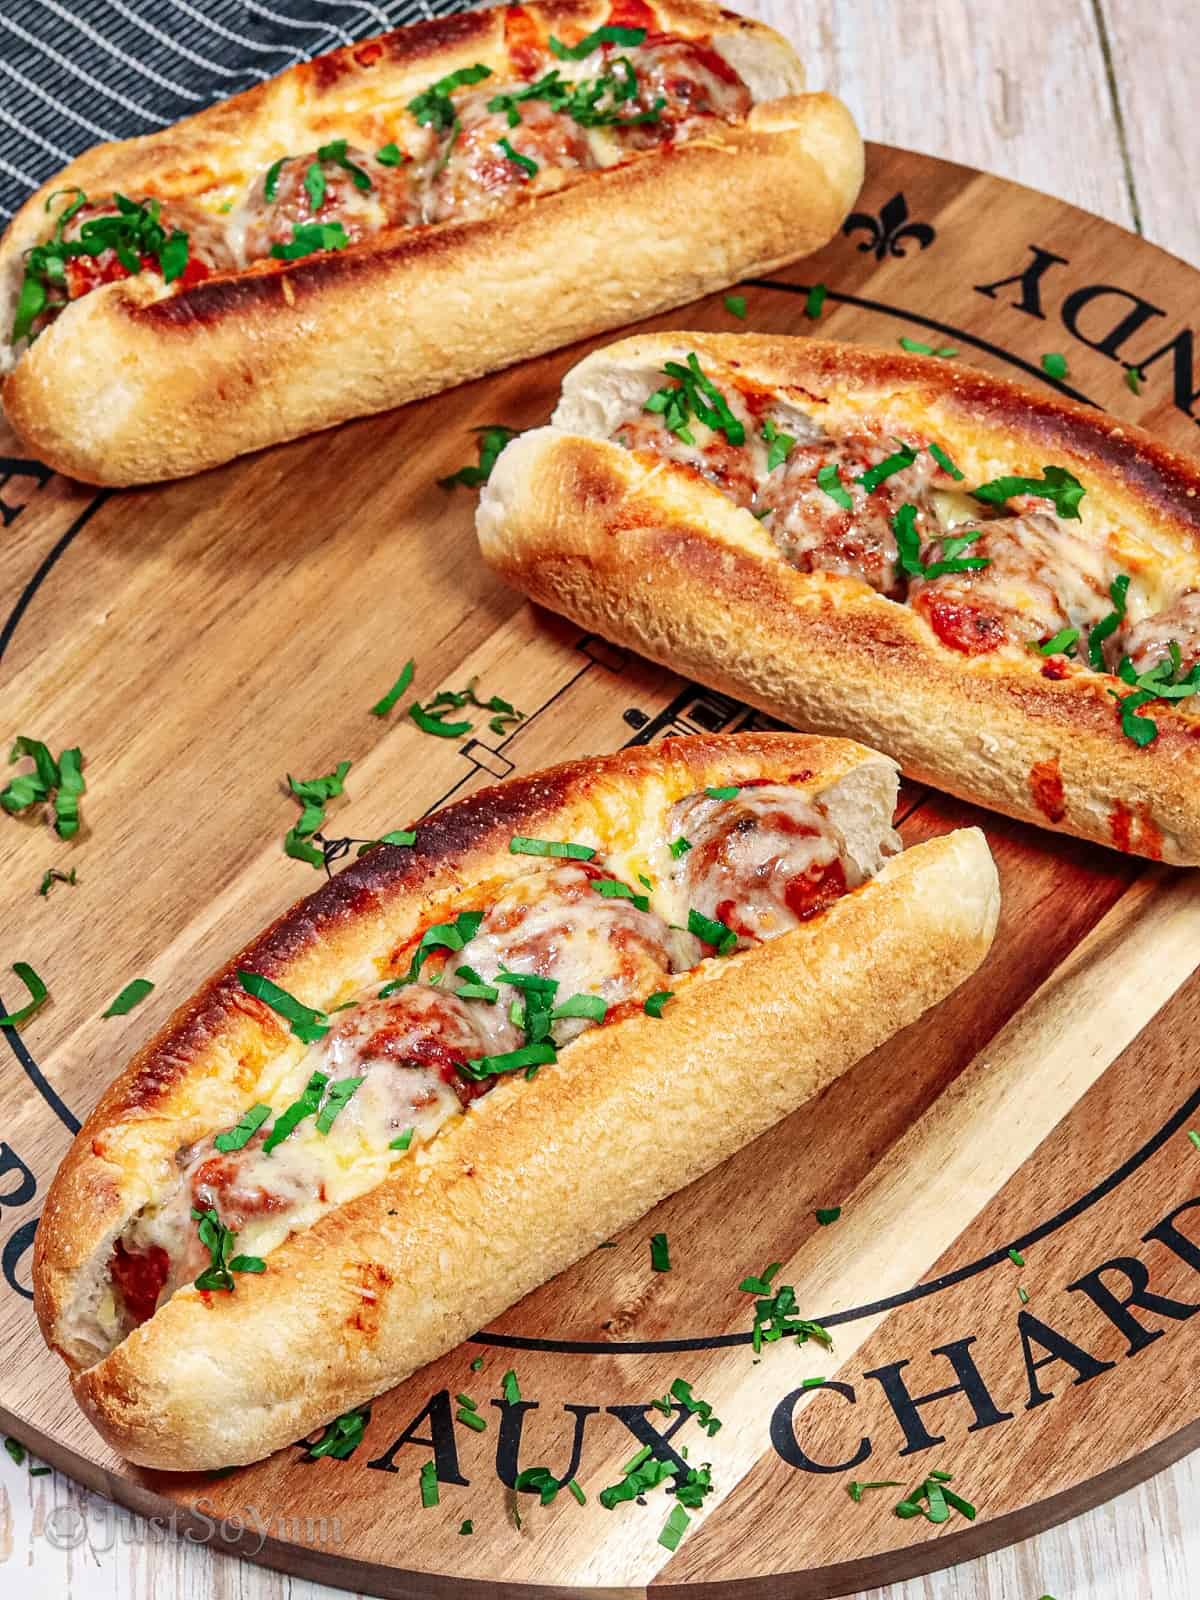 Grilled Cheesy Meatball Sub